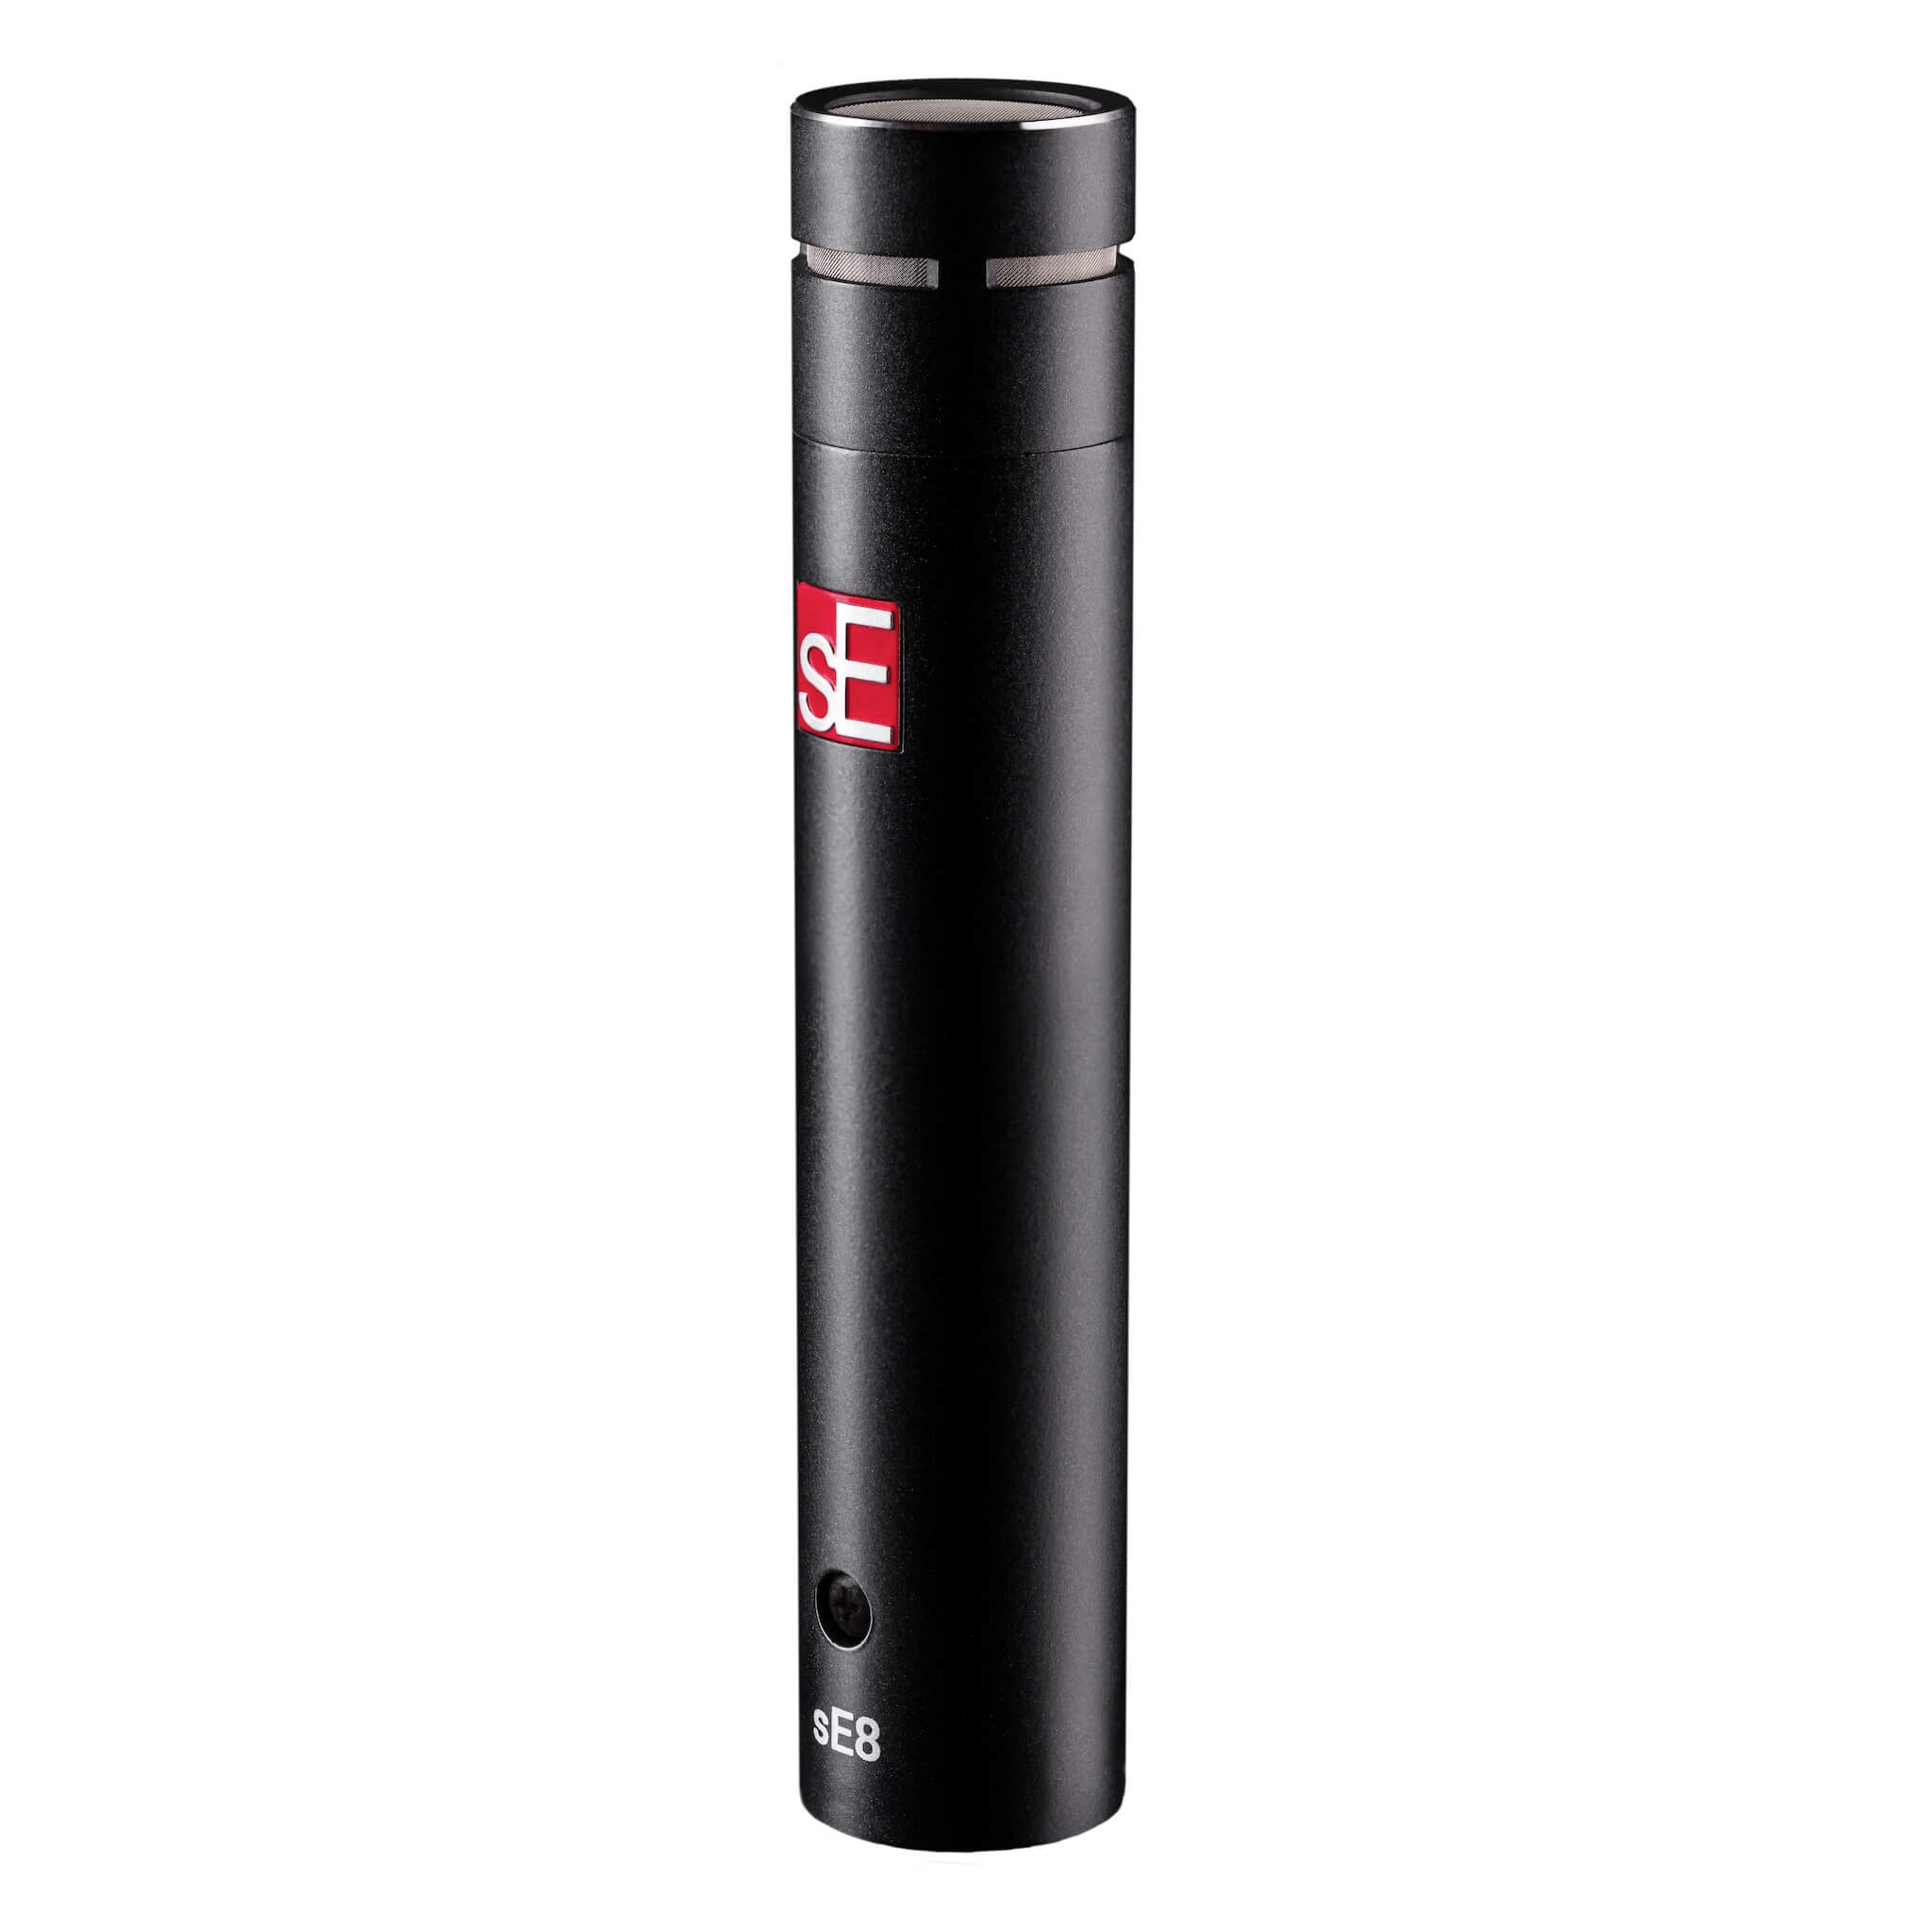 sE Electronics sE8 - Small Diaphragm Cardioid Condenser Microphone, side